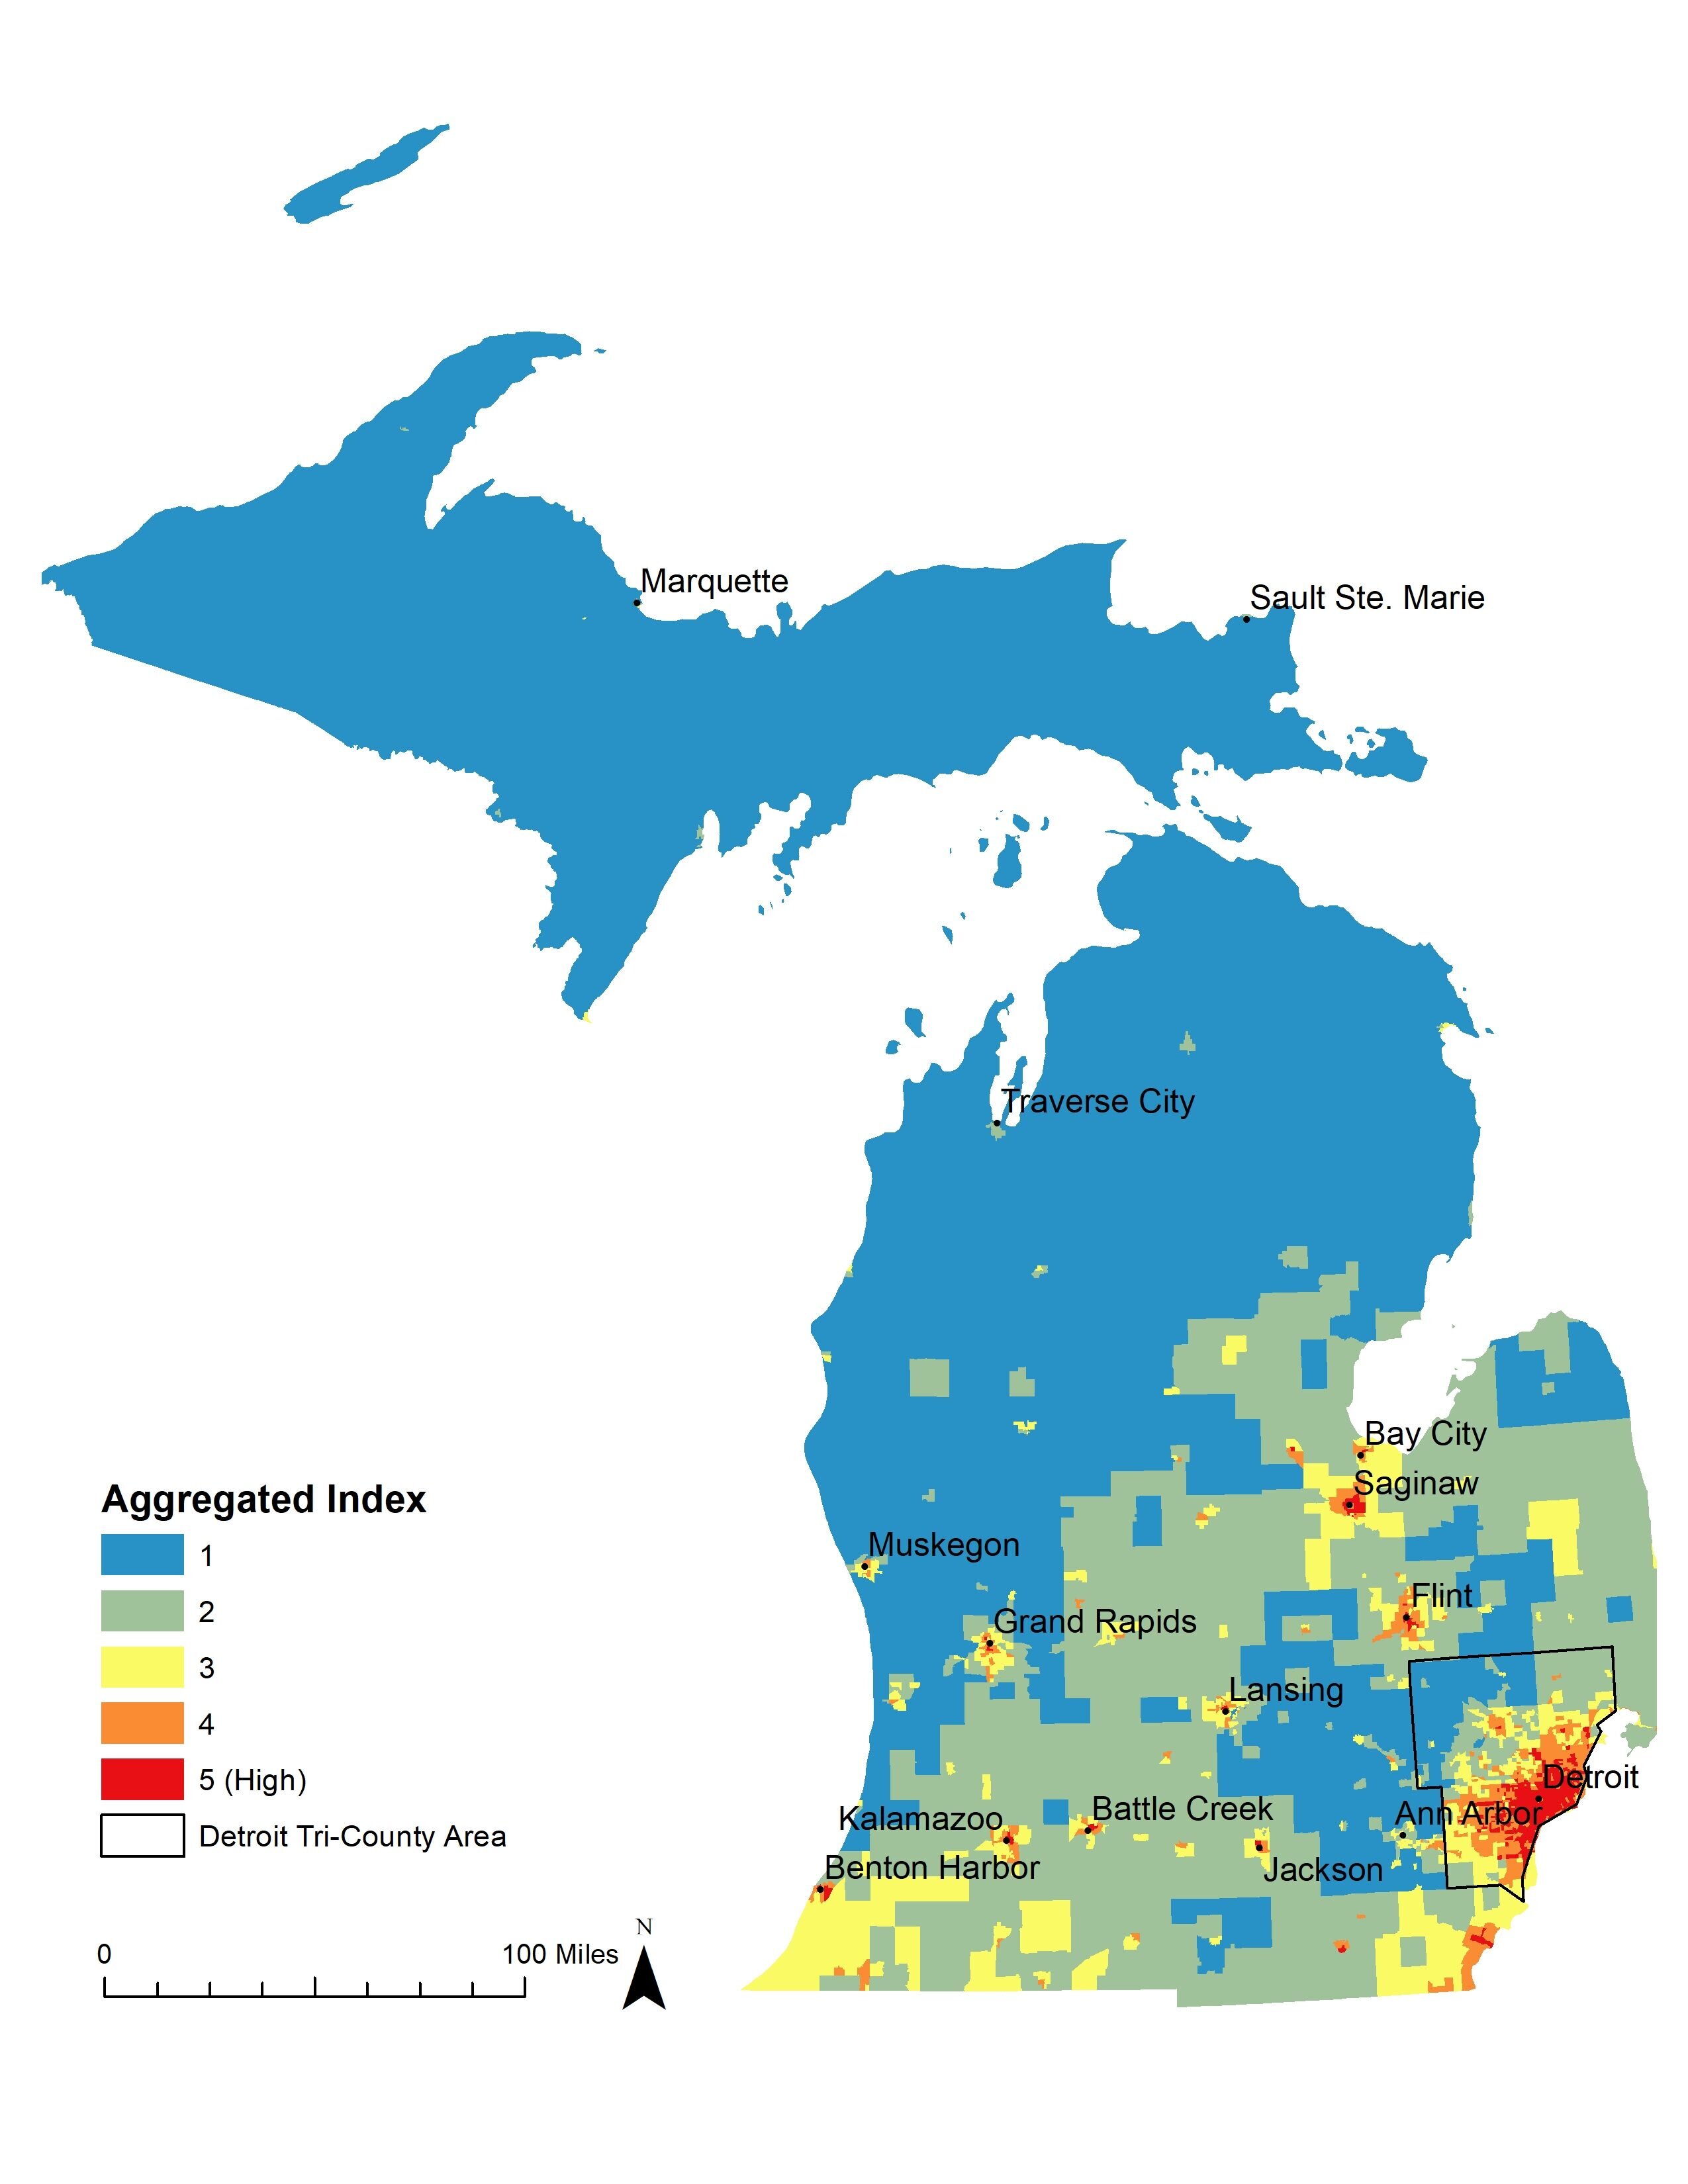 Maps highlight Michigan cities, groups that will bear brunt of climate change effects - Phys.Org